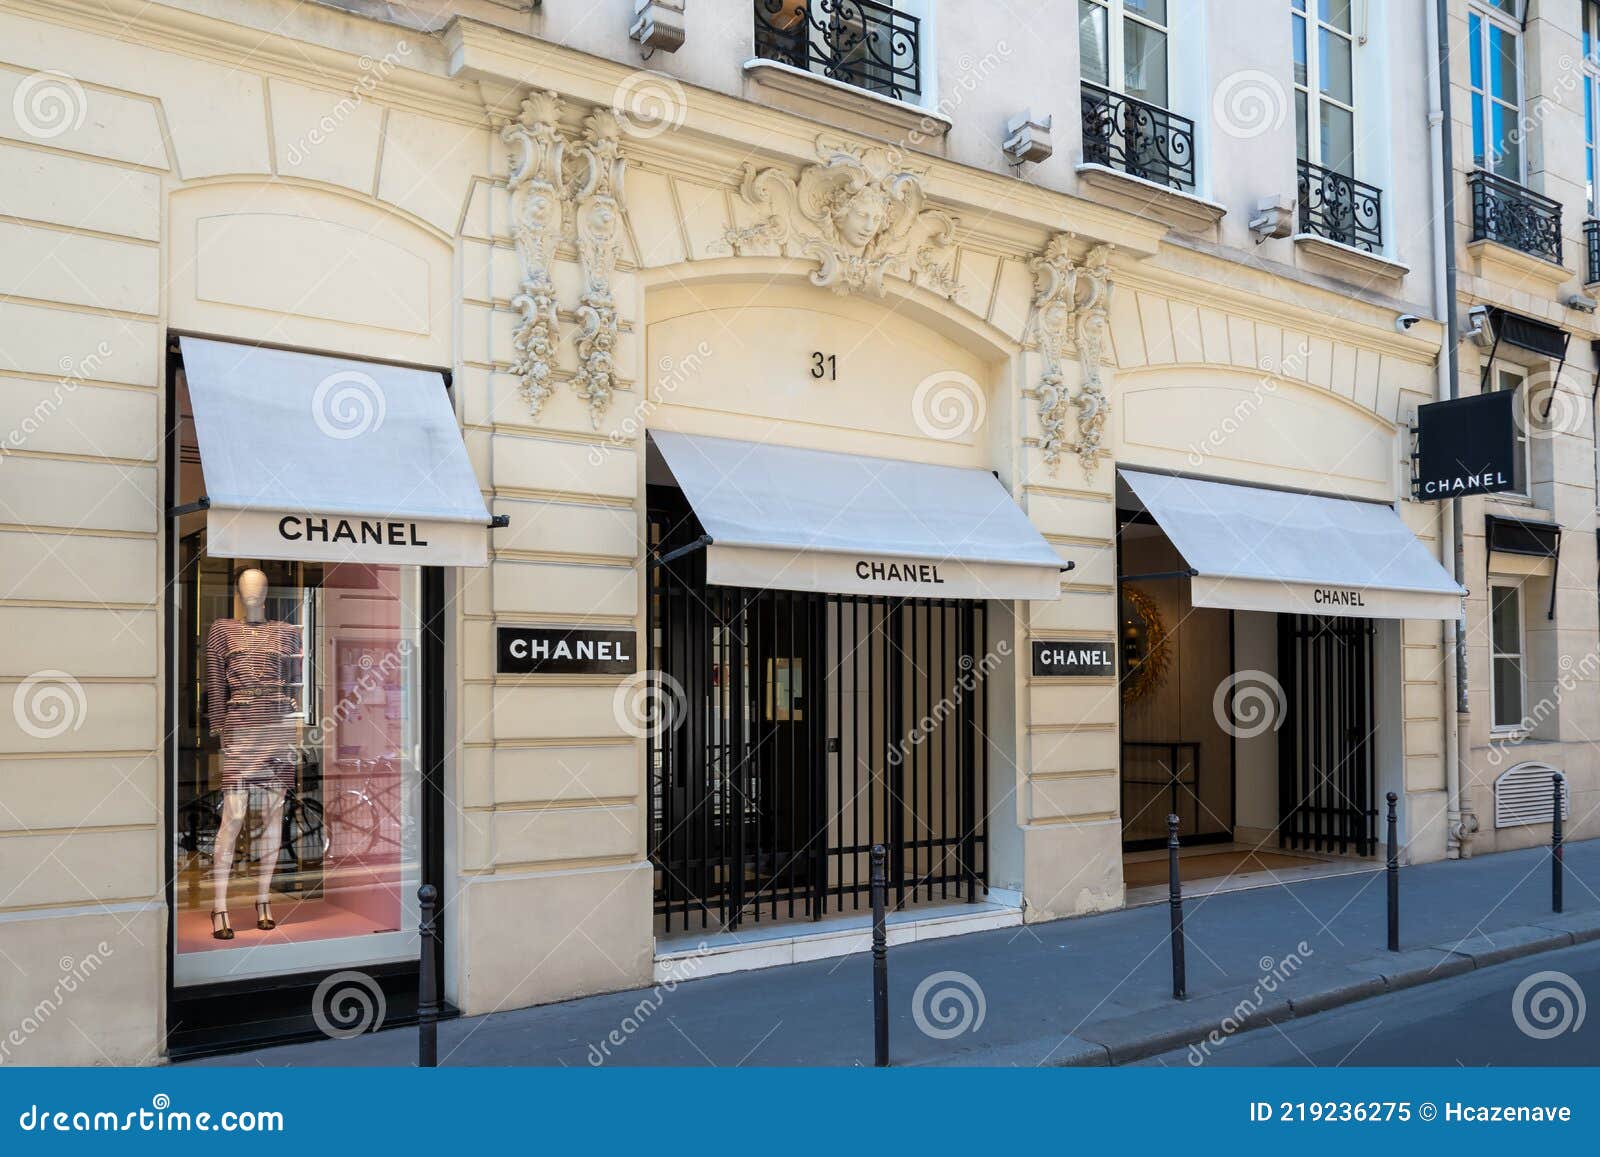 Exterior View of the Historic Chanel Store, Rue Cambon, Paris, France  Editorial Image - Image of chic, facade: 219236275